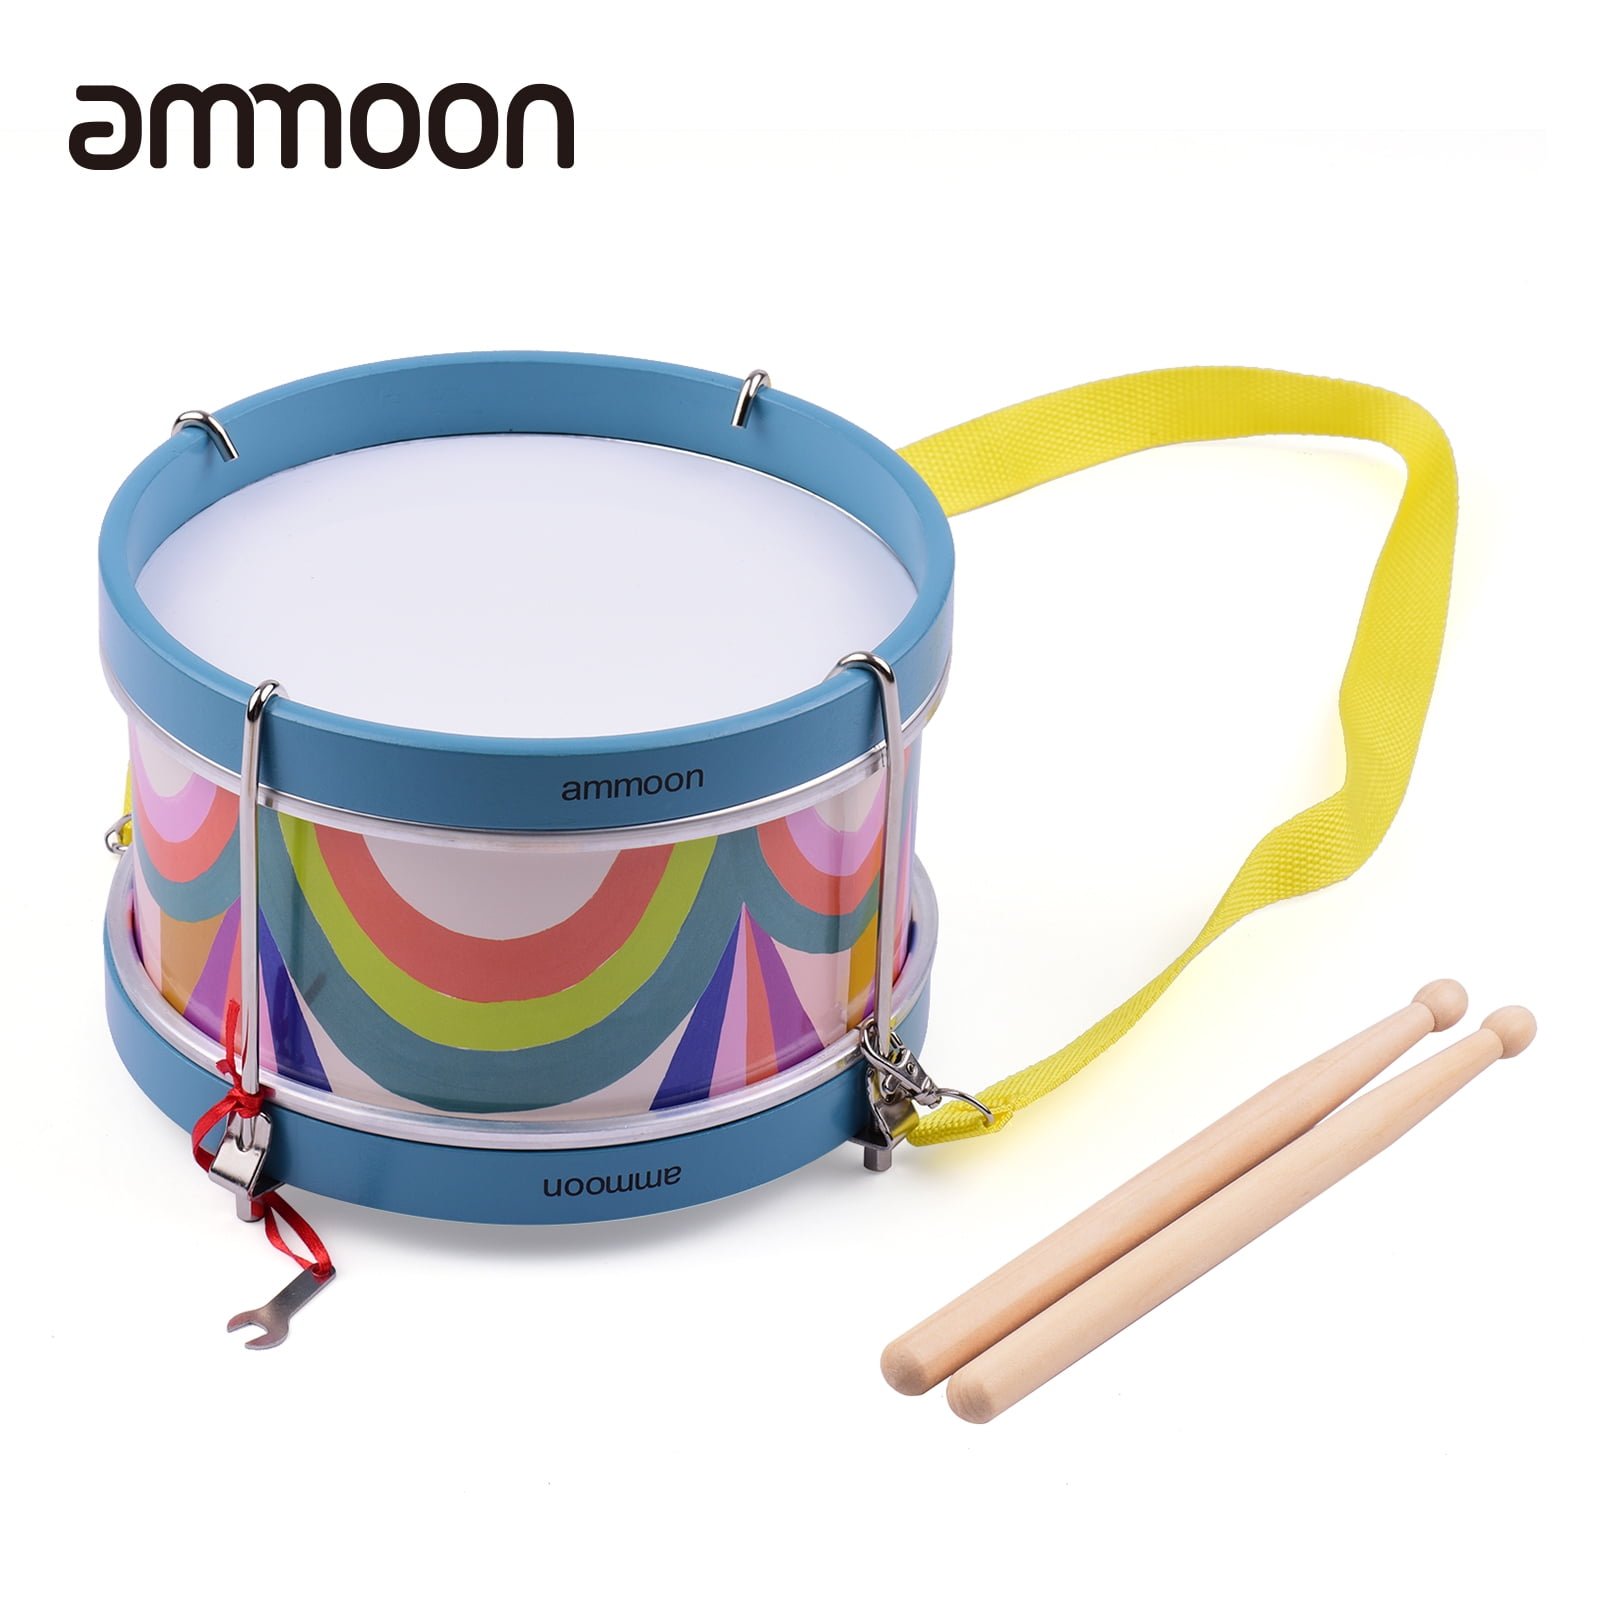 Wooden Drum with 2 Drumsticks & Strap For Kids Musical Educational Toy Gift New 